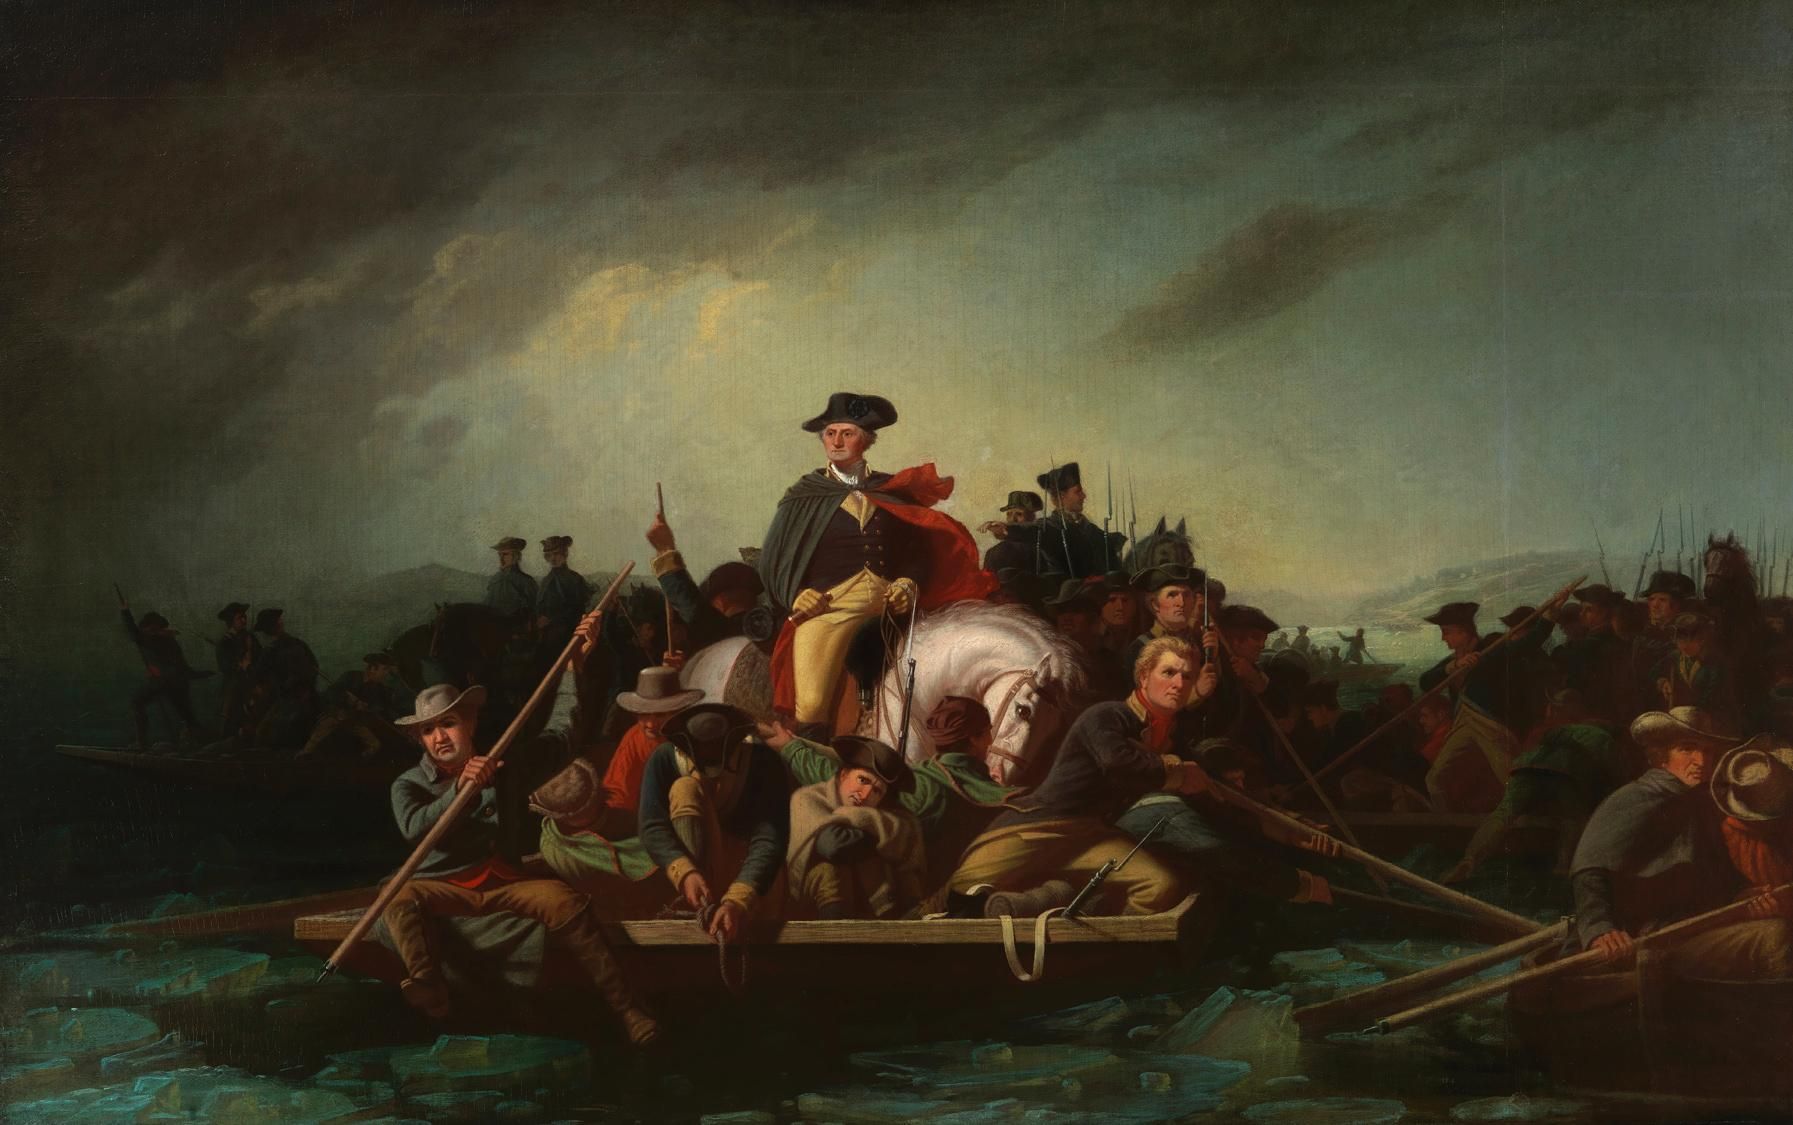 George Washington's crossing of the Delaware River